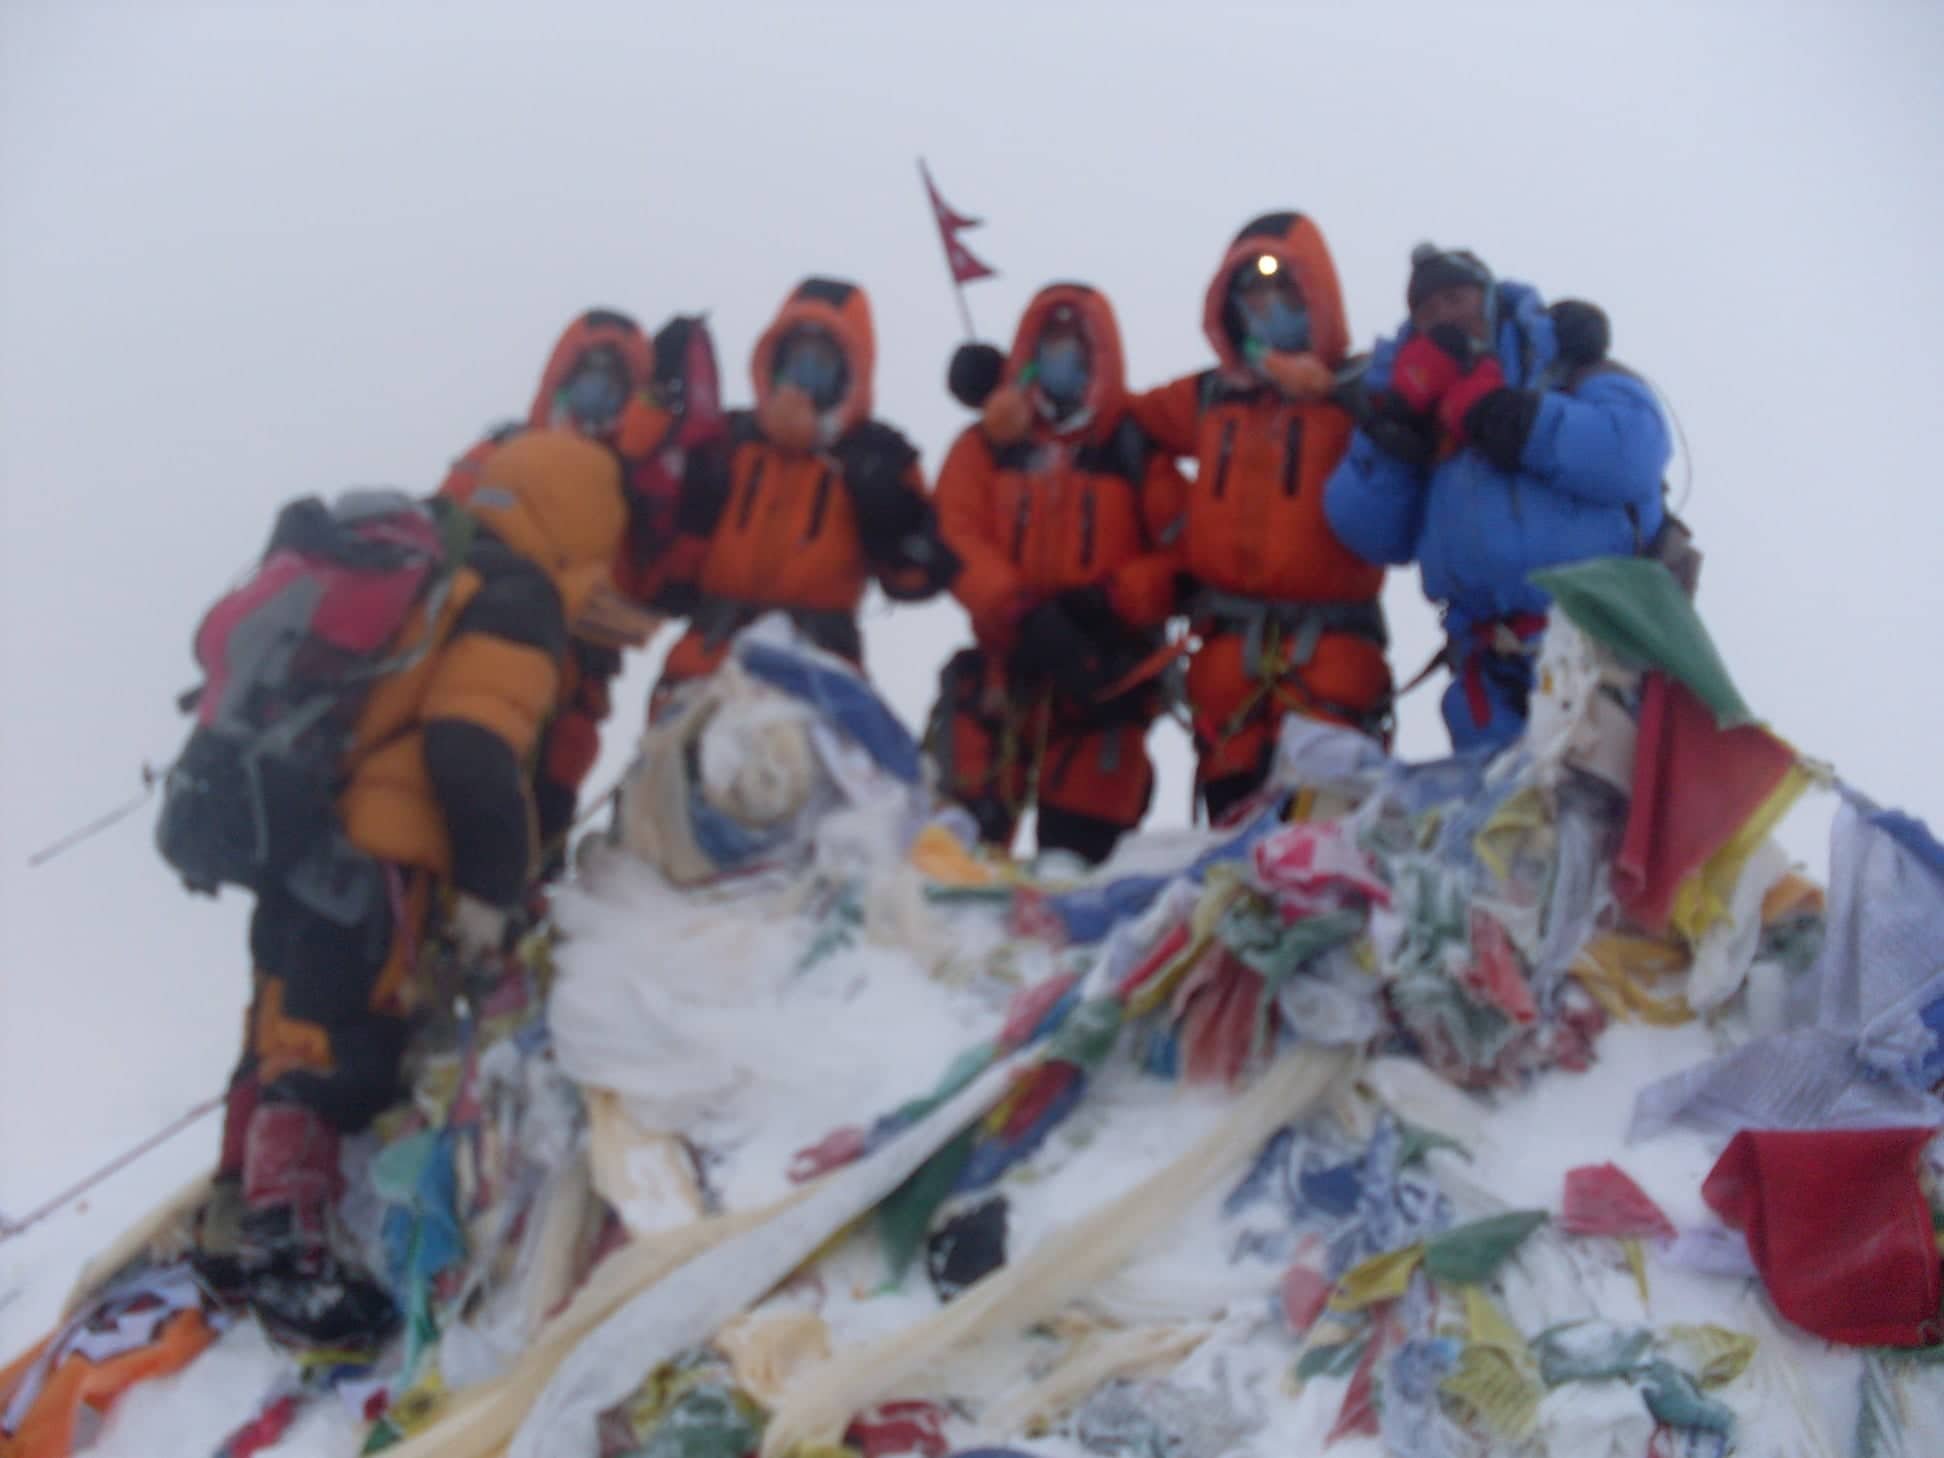 Everest 8848 climbing expedition- 2017